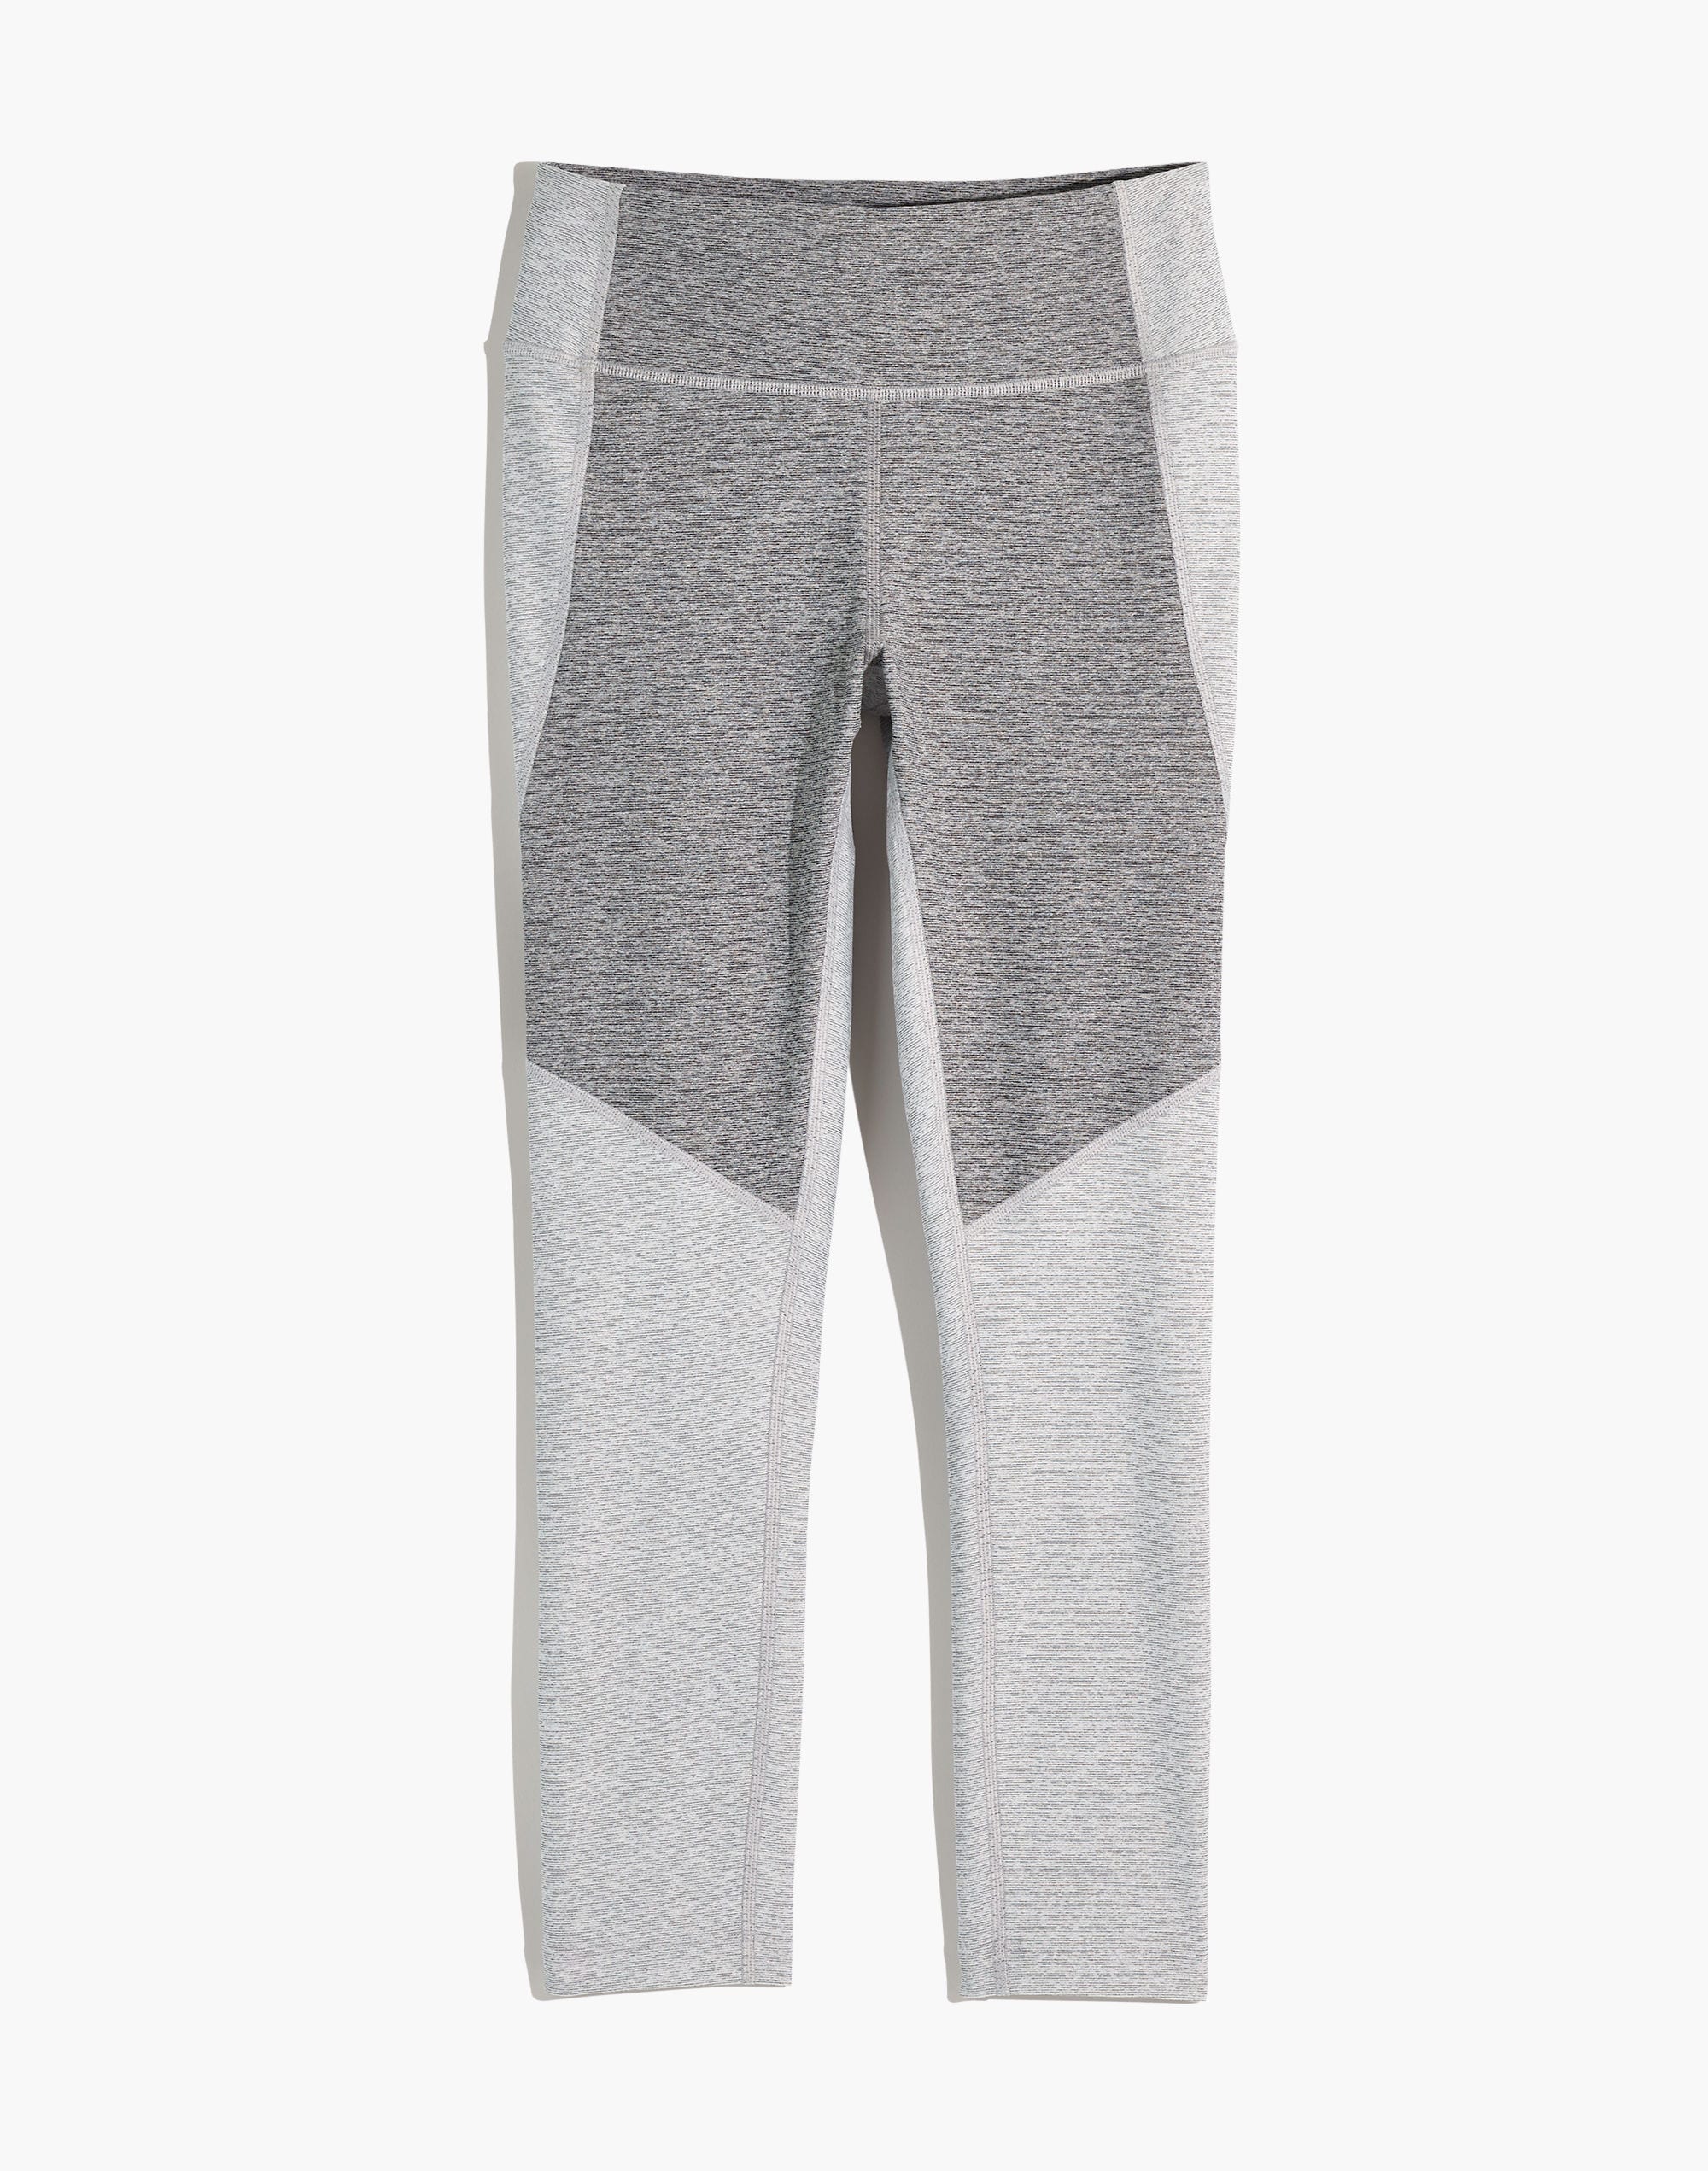 Outdoor Voices® 3/4 Warmup Leggings